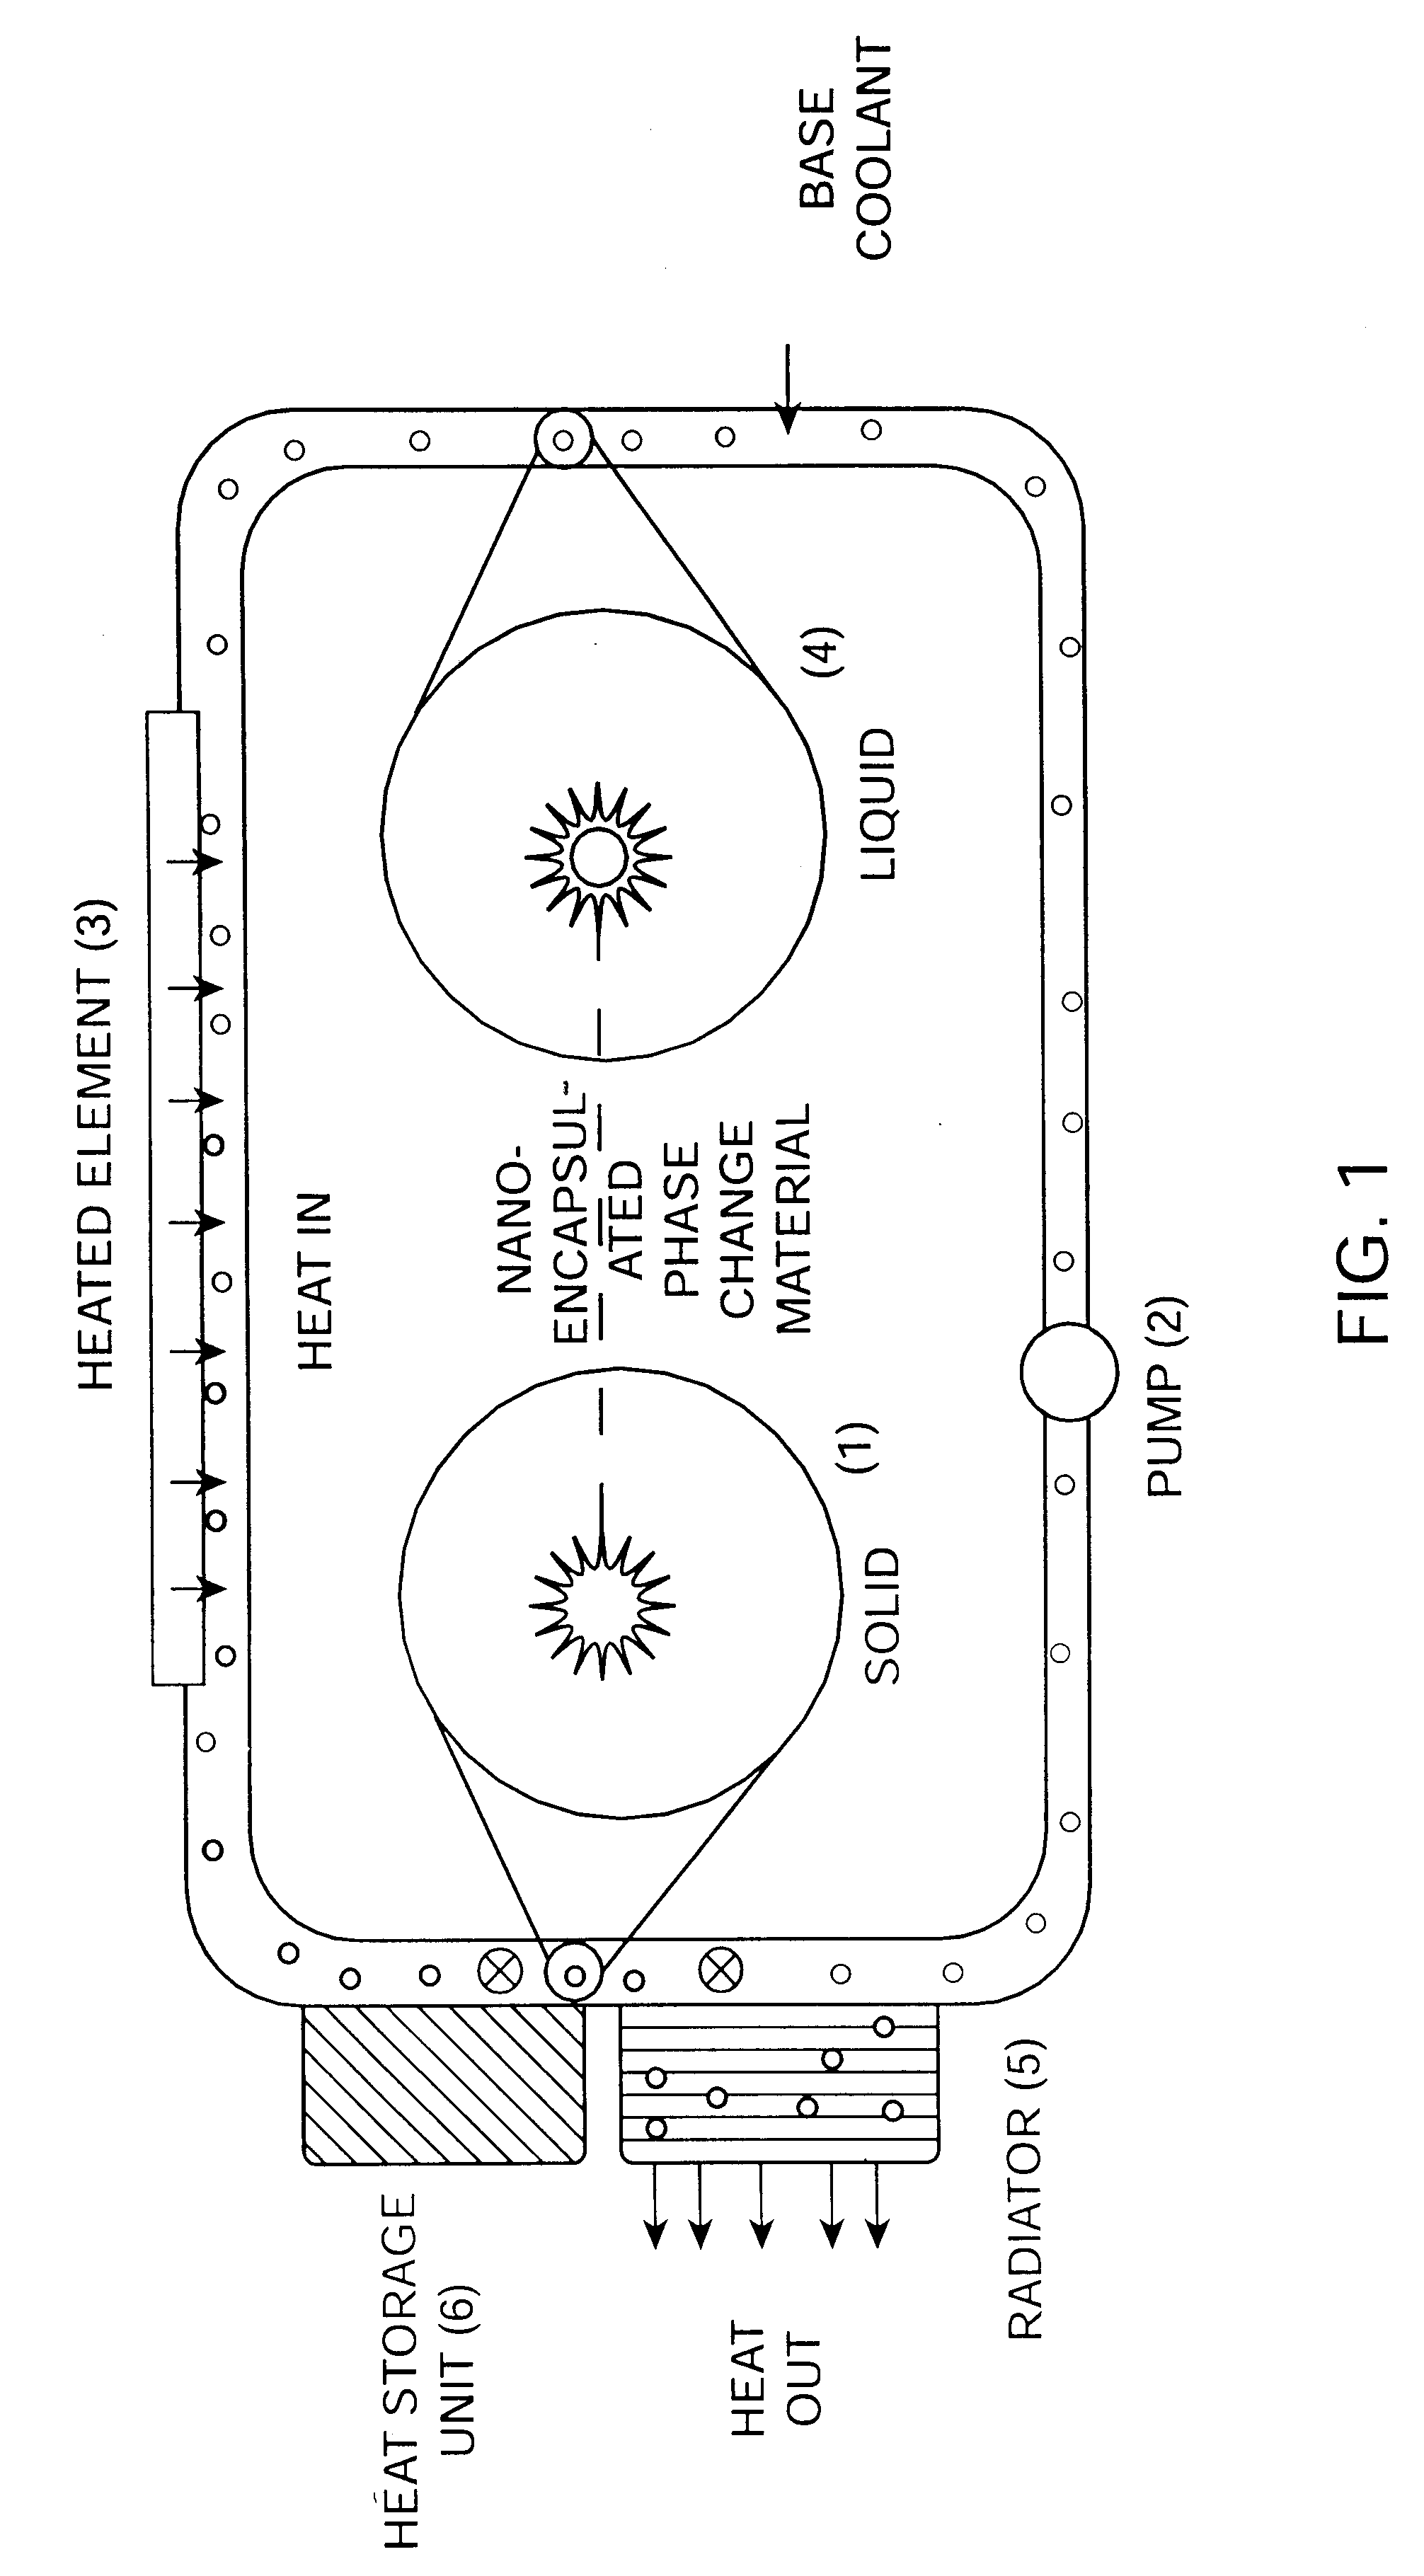 Nanometer sized phase change materials for enhanced heat transfer fluid performance